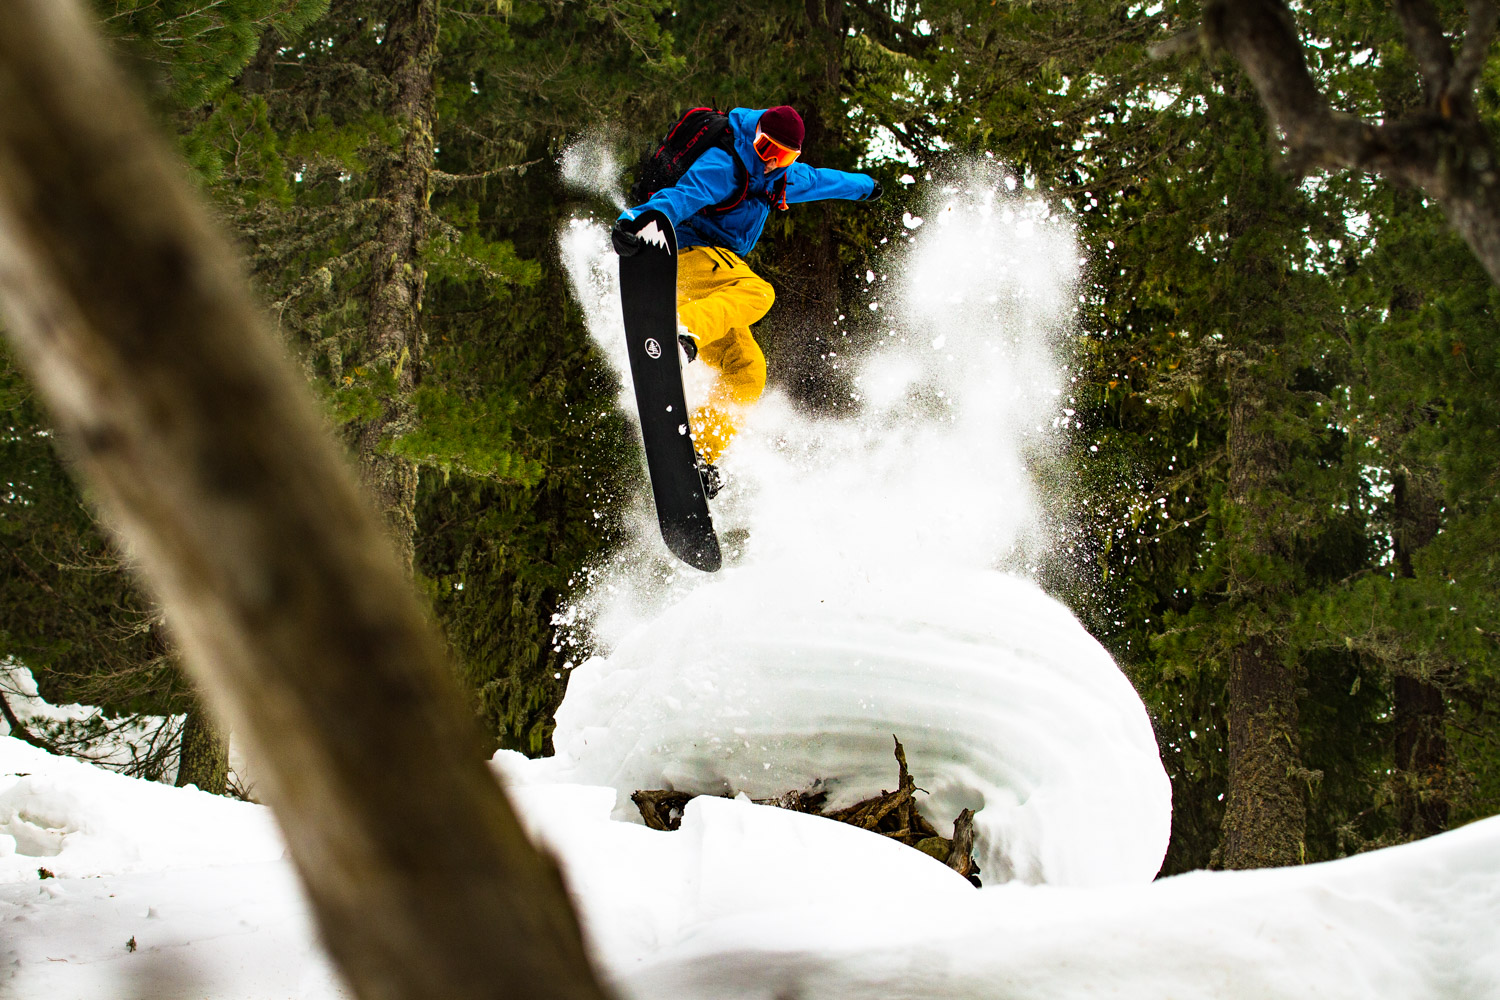 Snowboarder jumping from snow pile